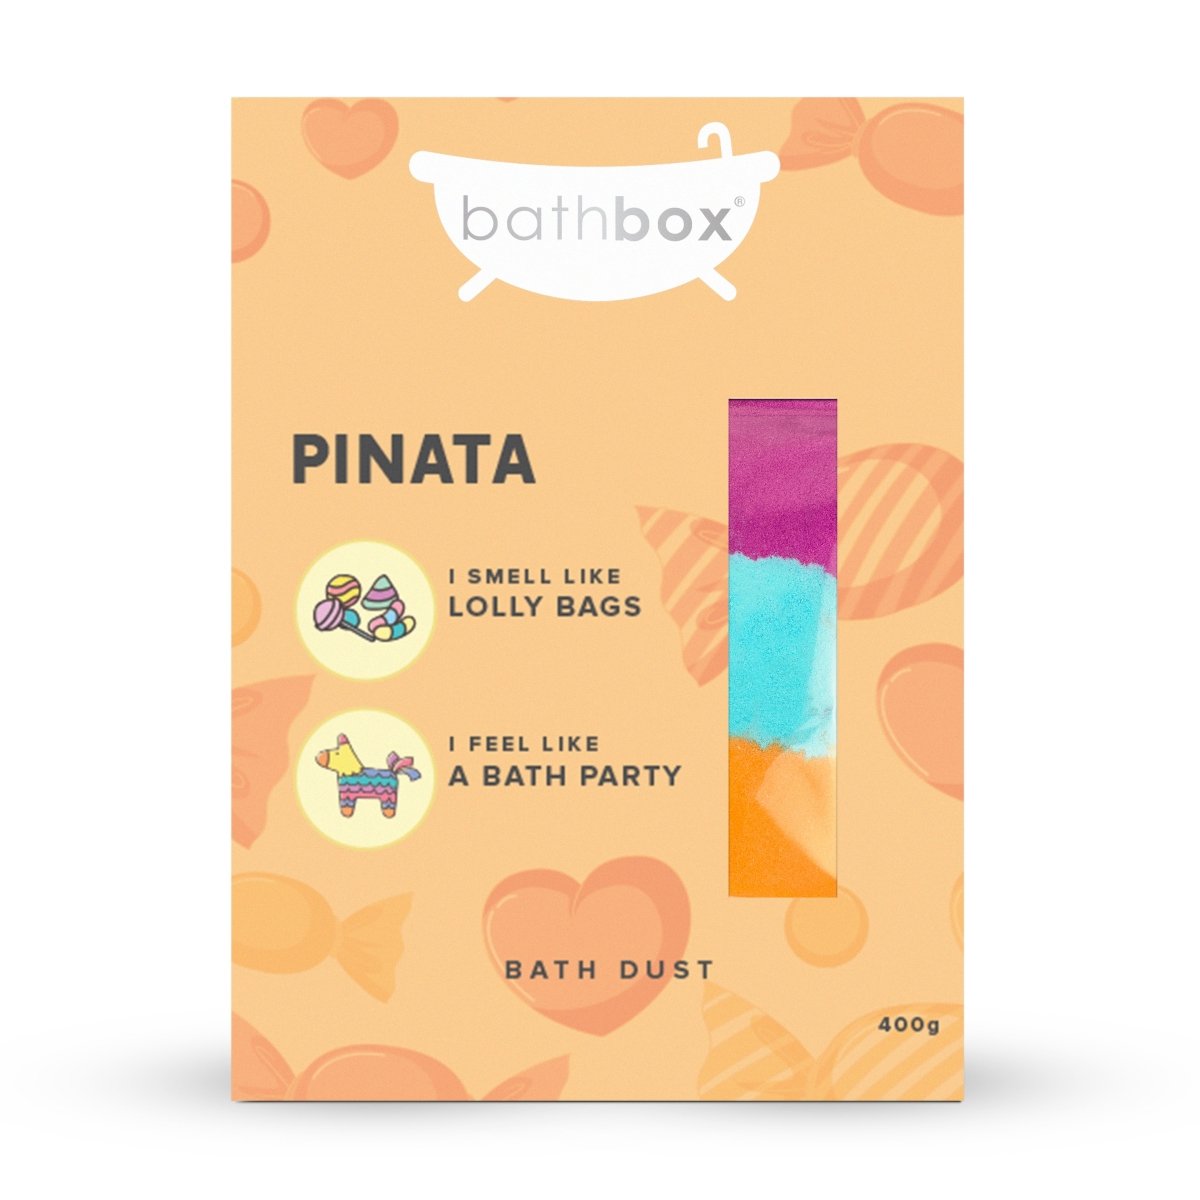 Pinata Bath Dust for Kids & Adults - Colourful Glitters & Lolly Bags Fragrance - Made in Australia by Bath Box